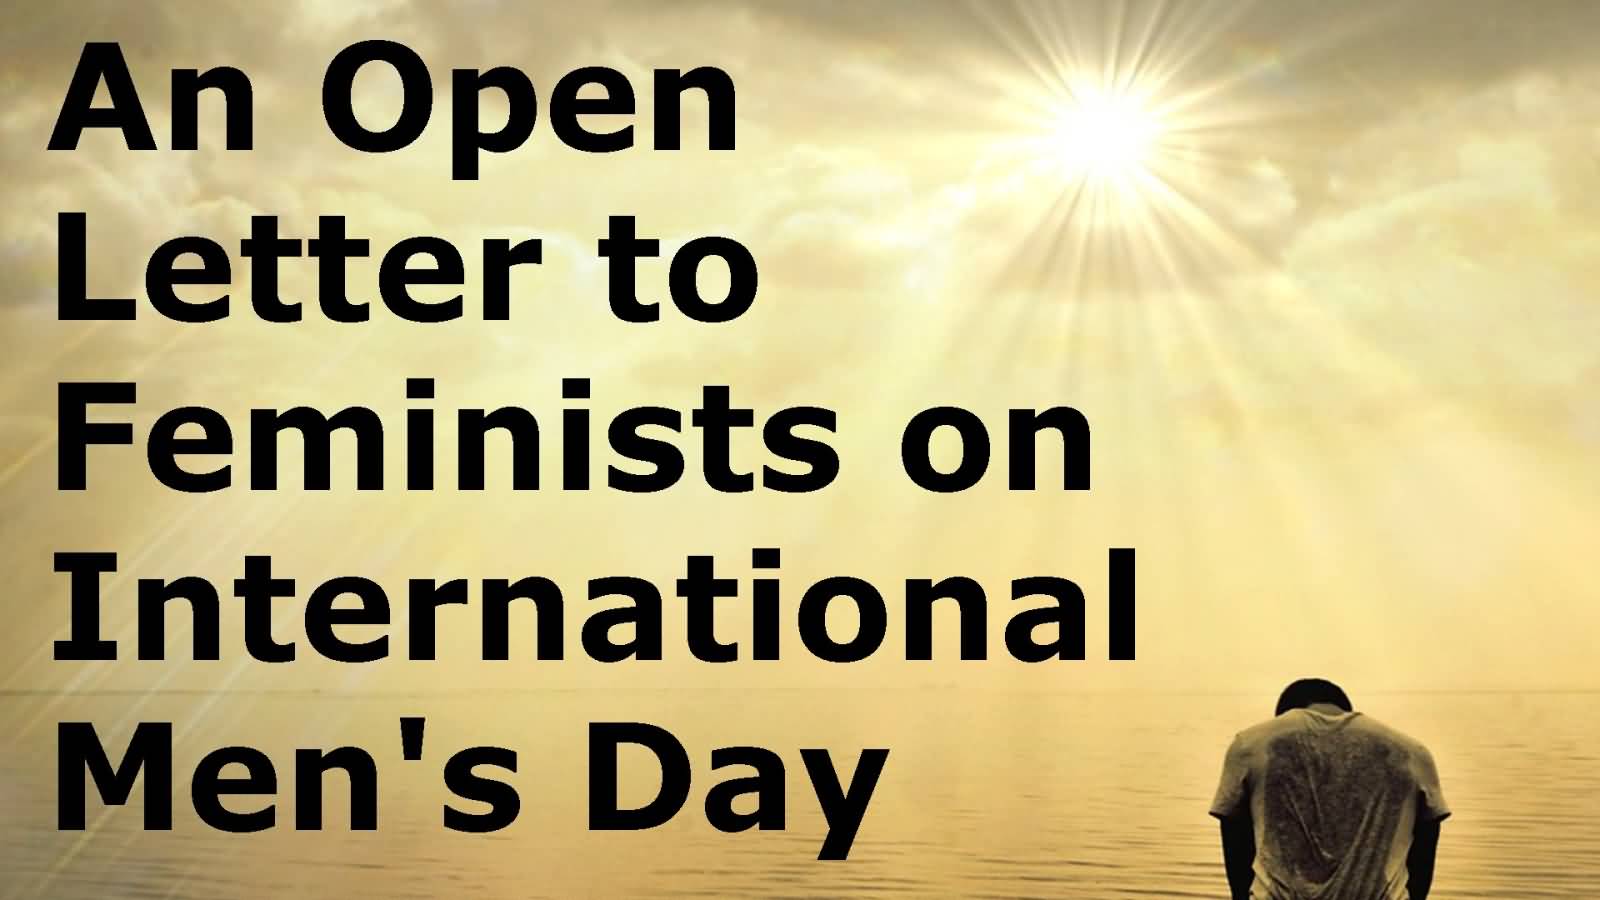 An Open Letter To Feminists On International Men's Day